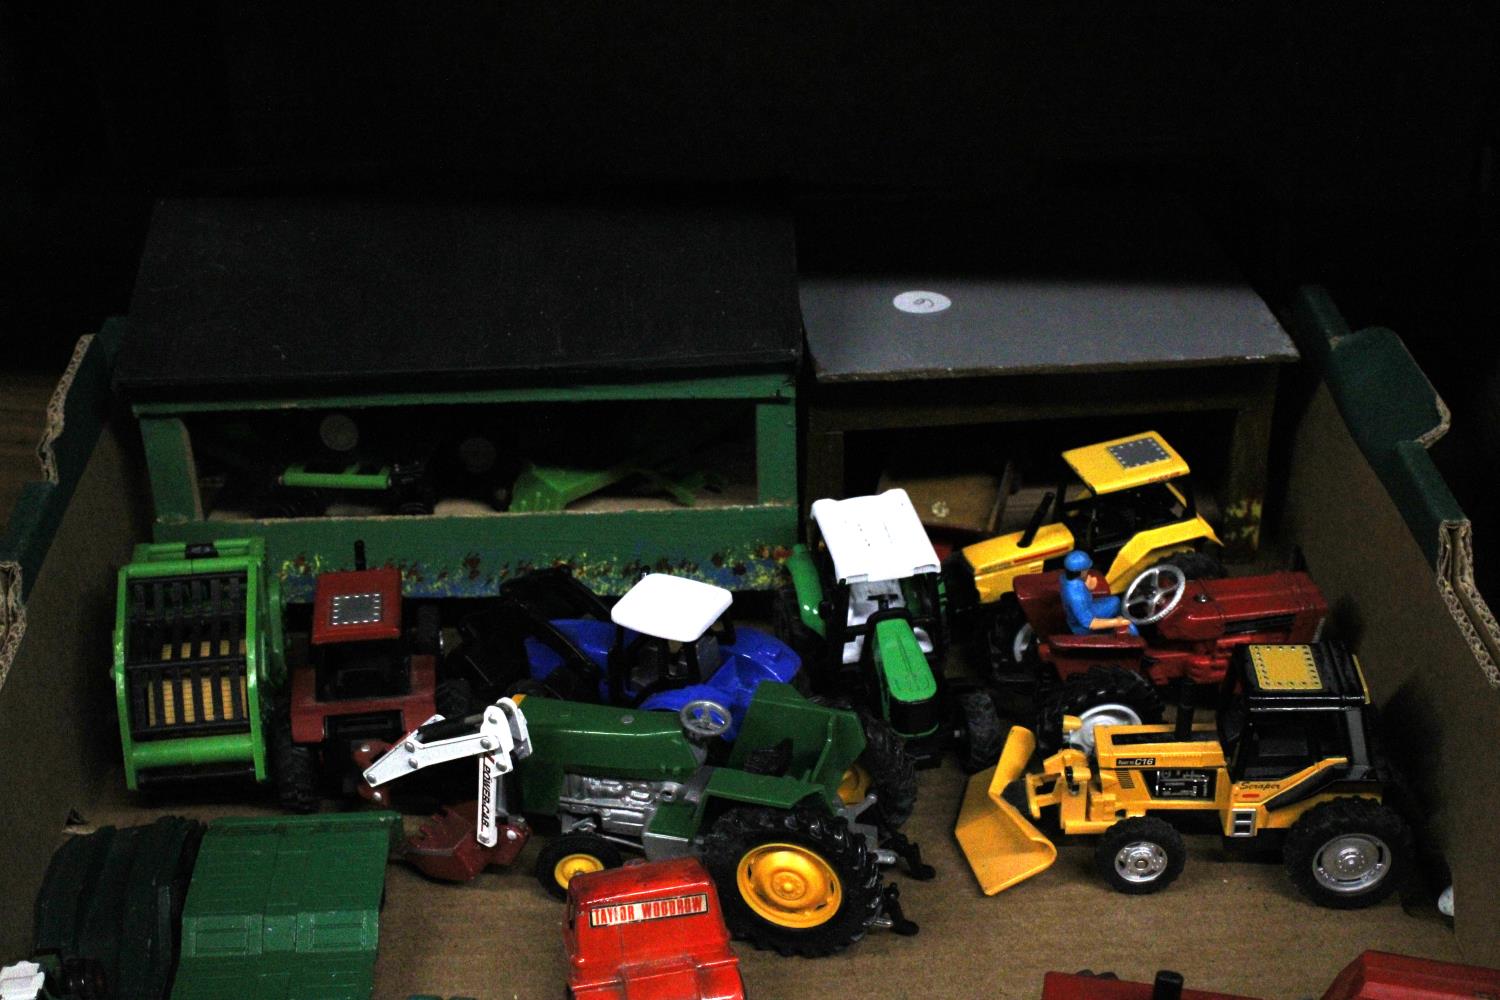 A QUANTITY OF FARM RELATED TOYS AND BUILDINGS - Image 3 of 4